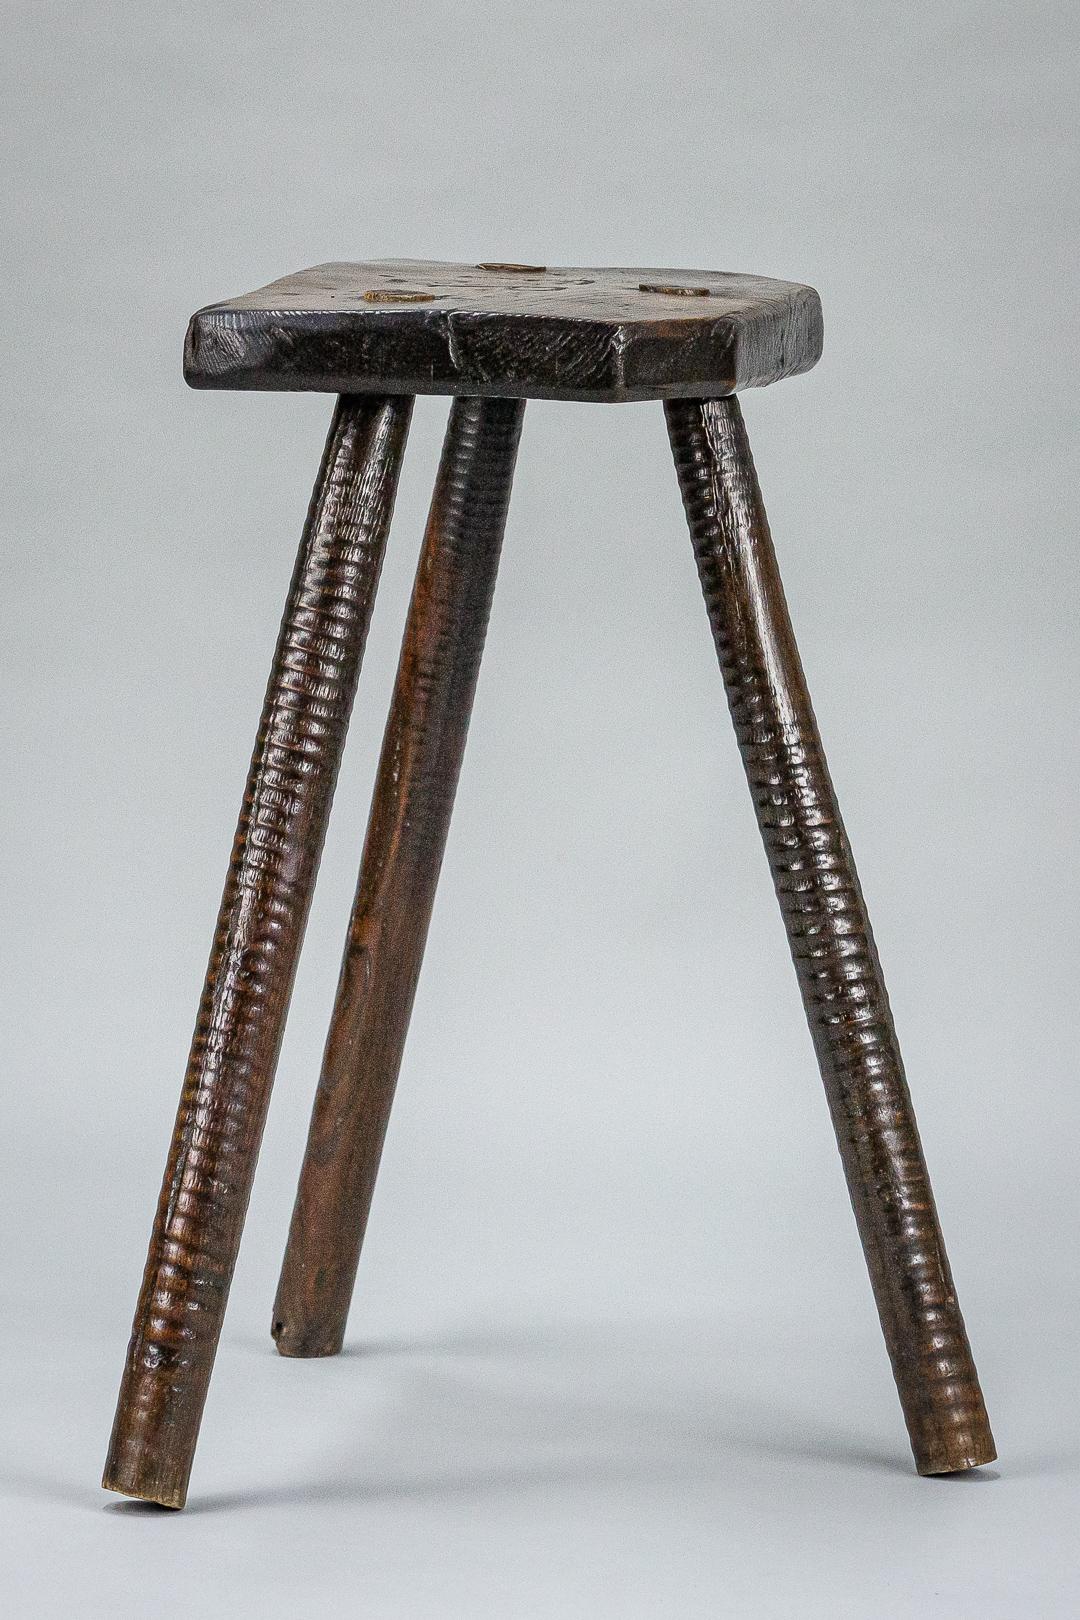 Smart 19th century cutlers stool, typical ribbed legs, wonderful patina. Initialed, presumably by the owner 